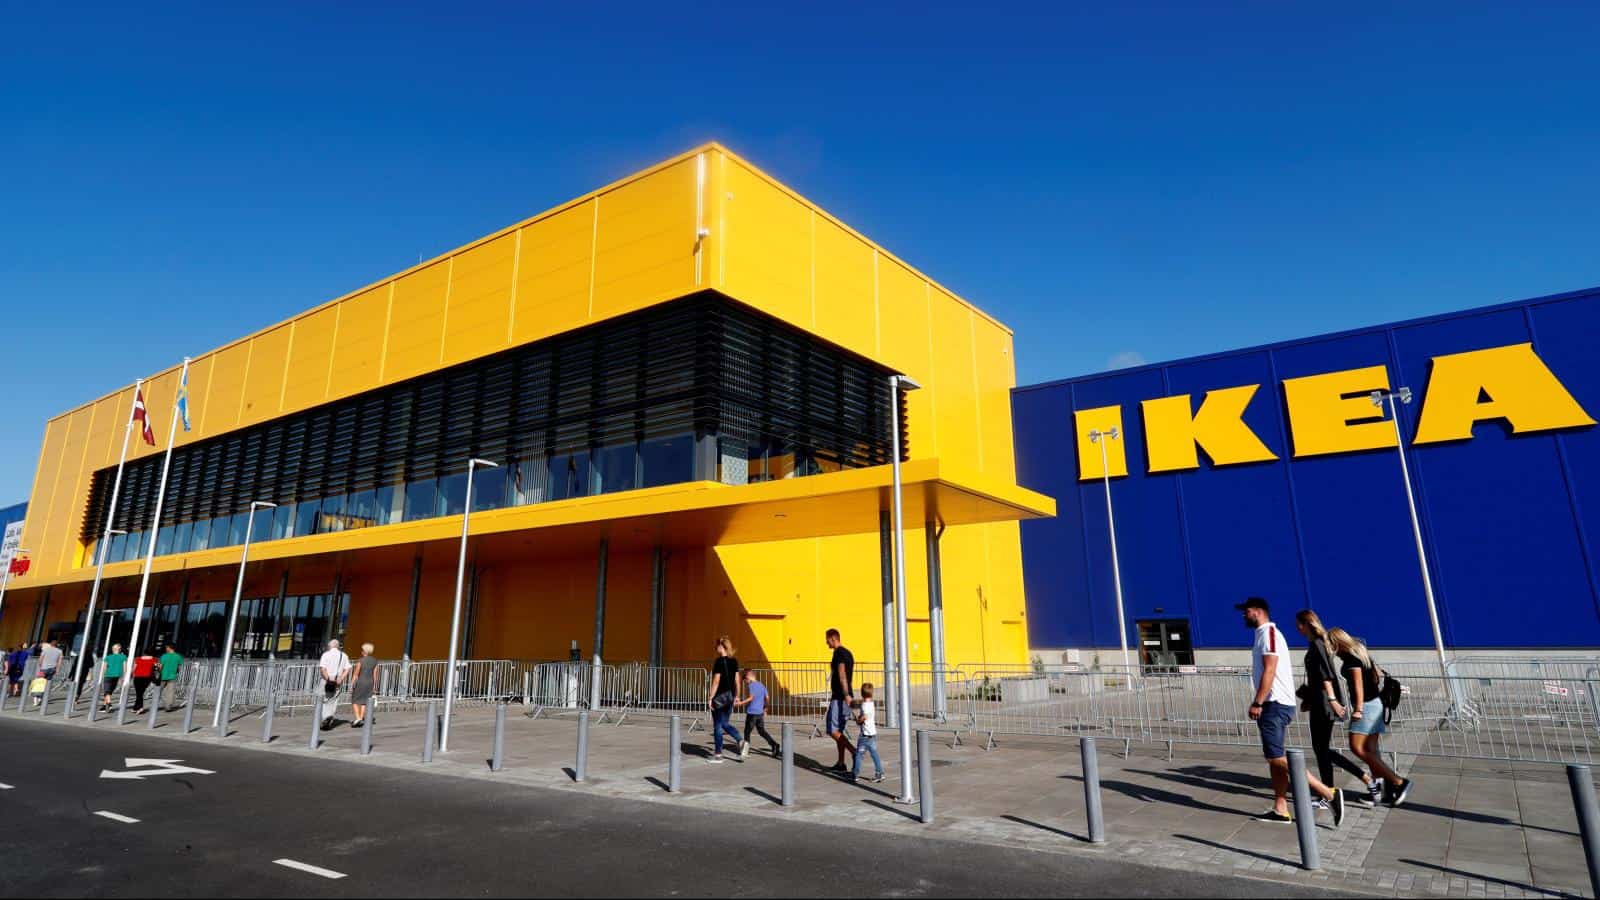 IKEA announce 24-hour virtual festival of home touring around the world